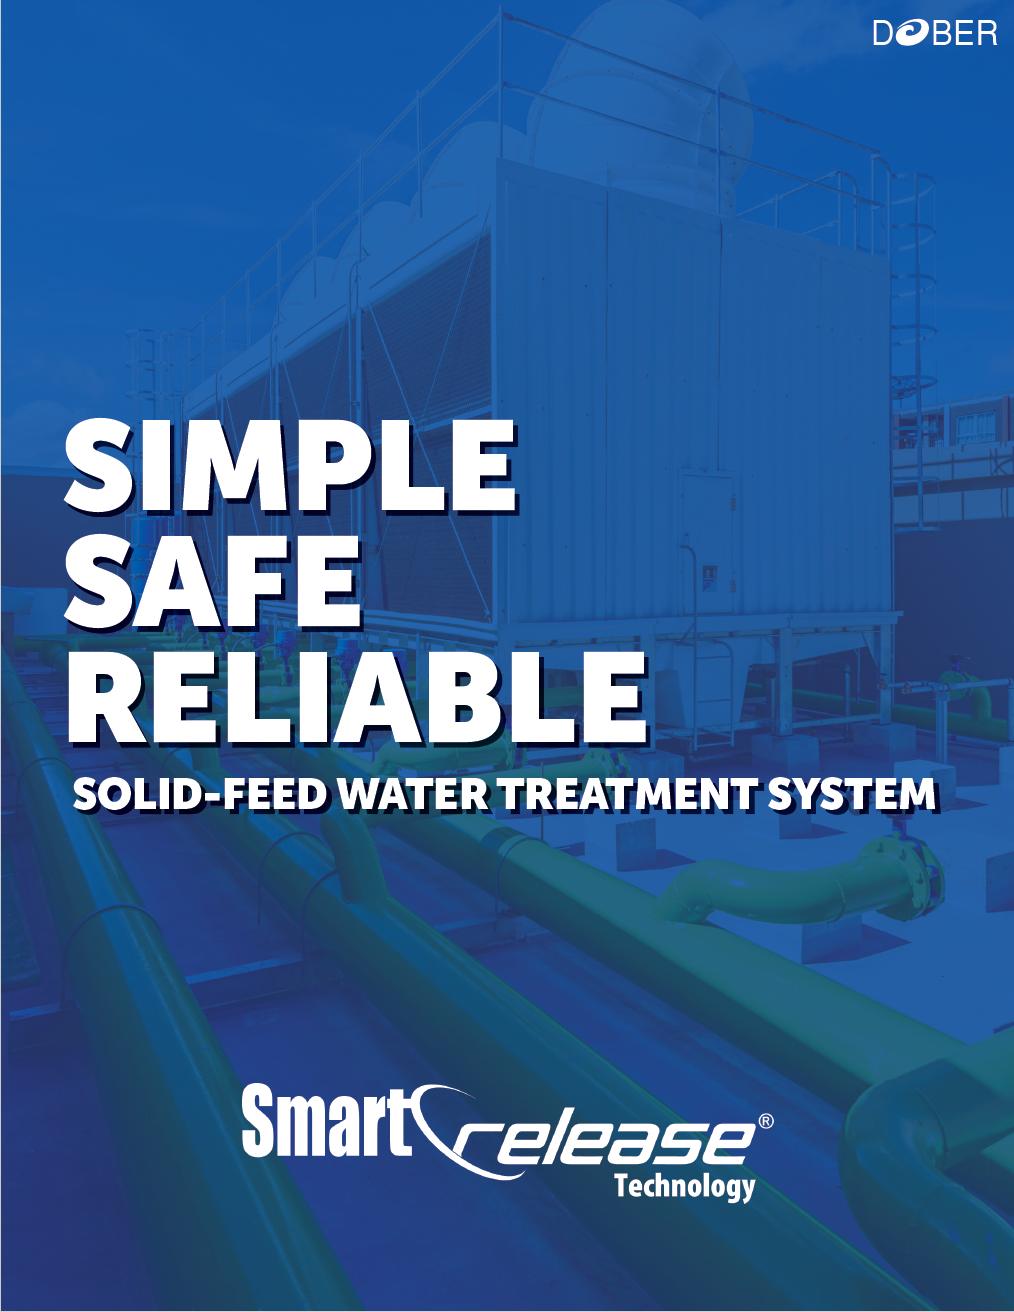 Smart Release Technology product catalog